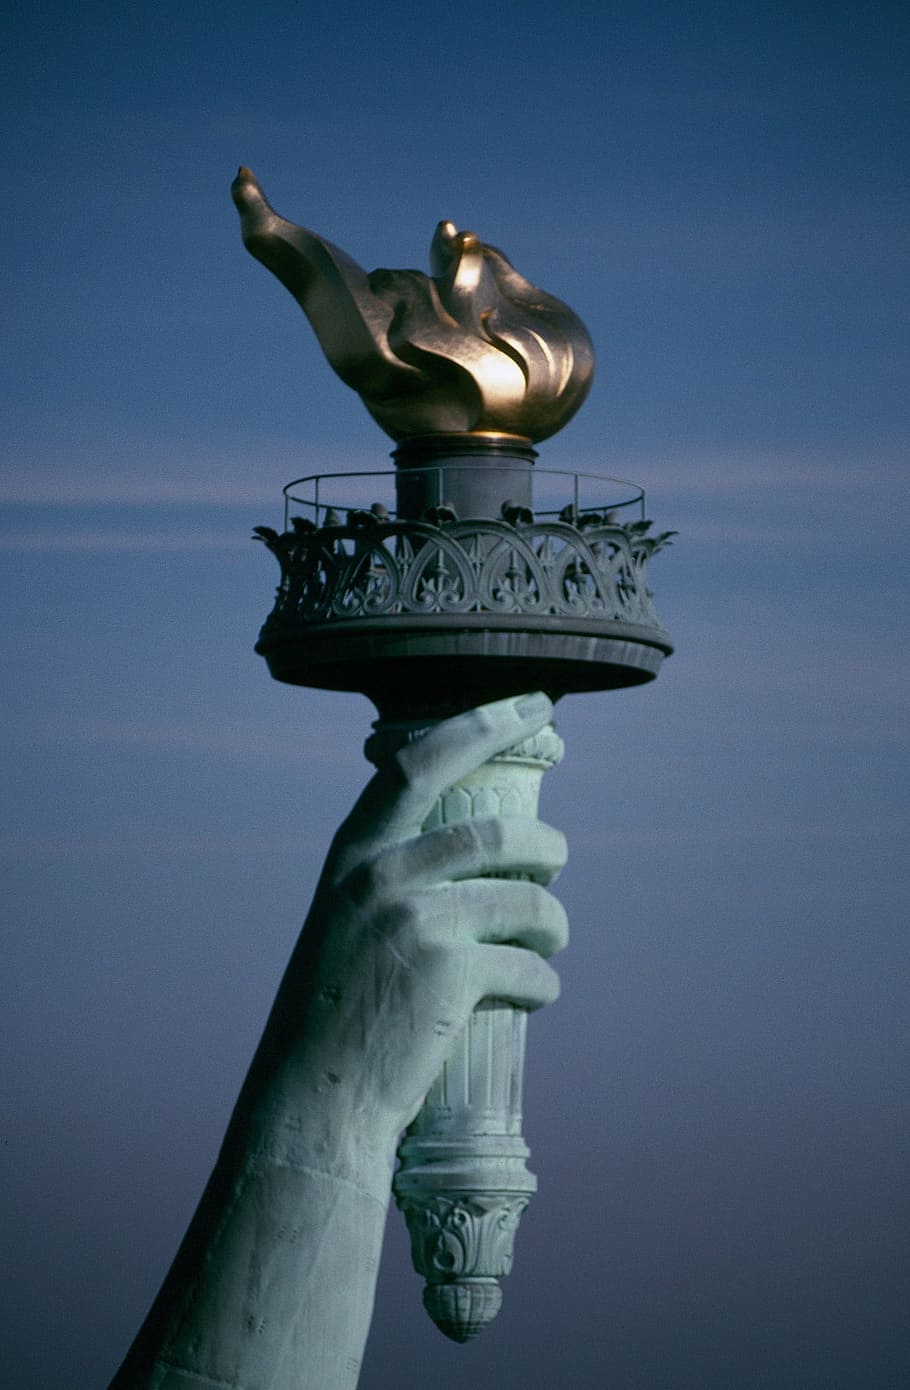 statue, liberty torch photography, daytime, statue of liberty, flame, torch, symbol, dom, arm, new york city